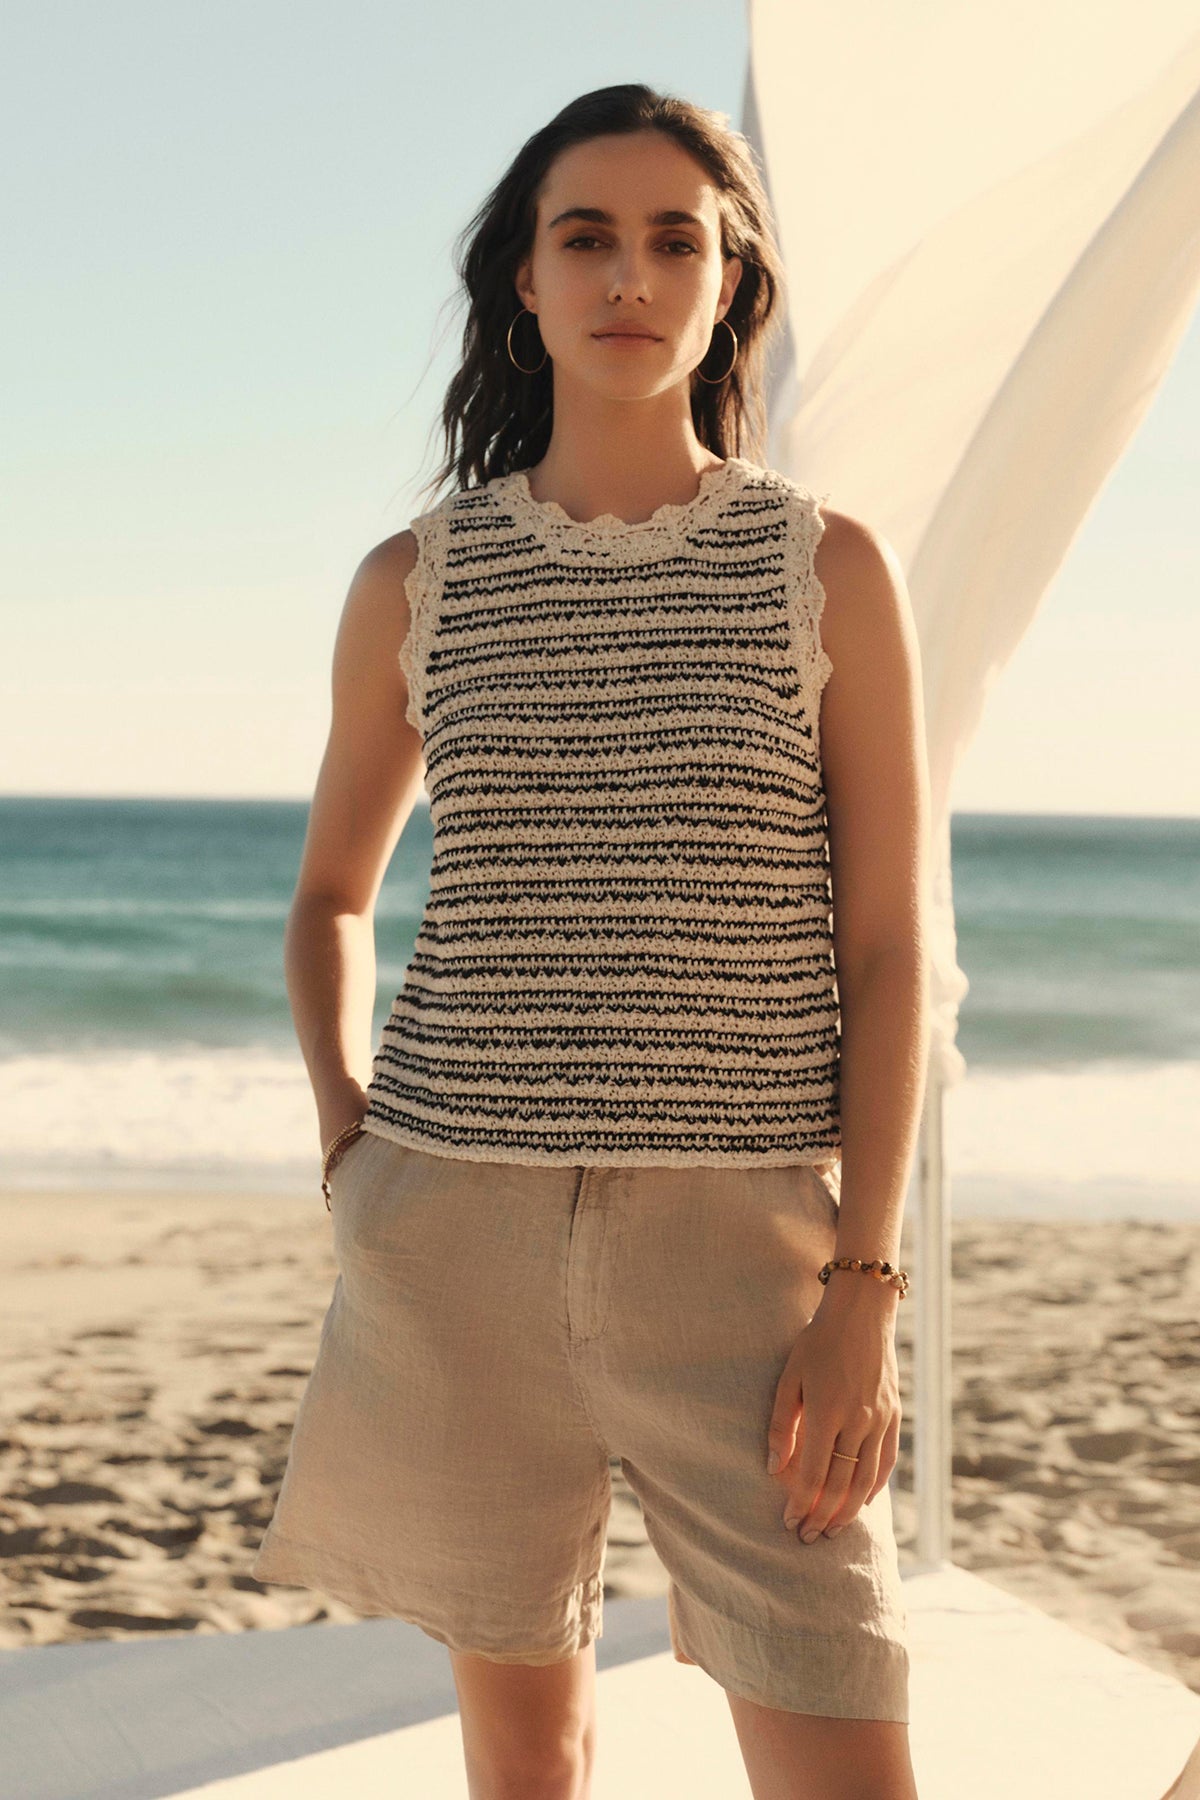 Woman in a sleeveless Sophie sweater vest by Velvet by Graham & Spencer and shorts standing on a sandy beach with the ocean in the background and a white fabric element on the left.-36910013776065